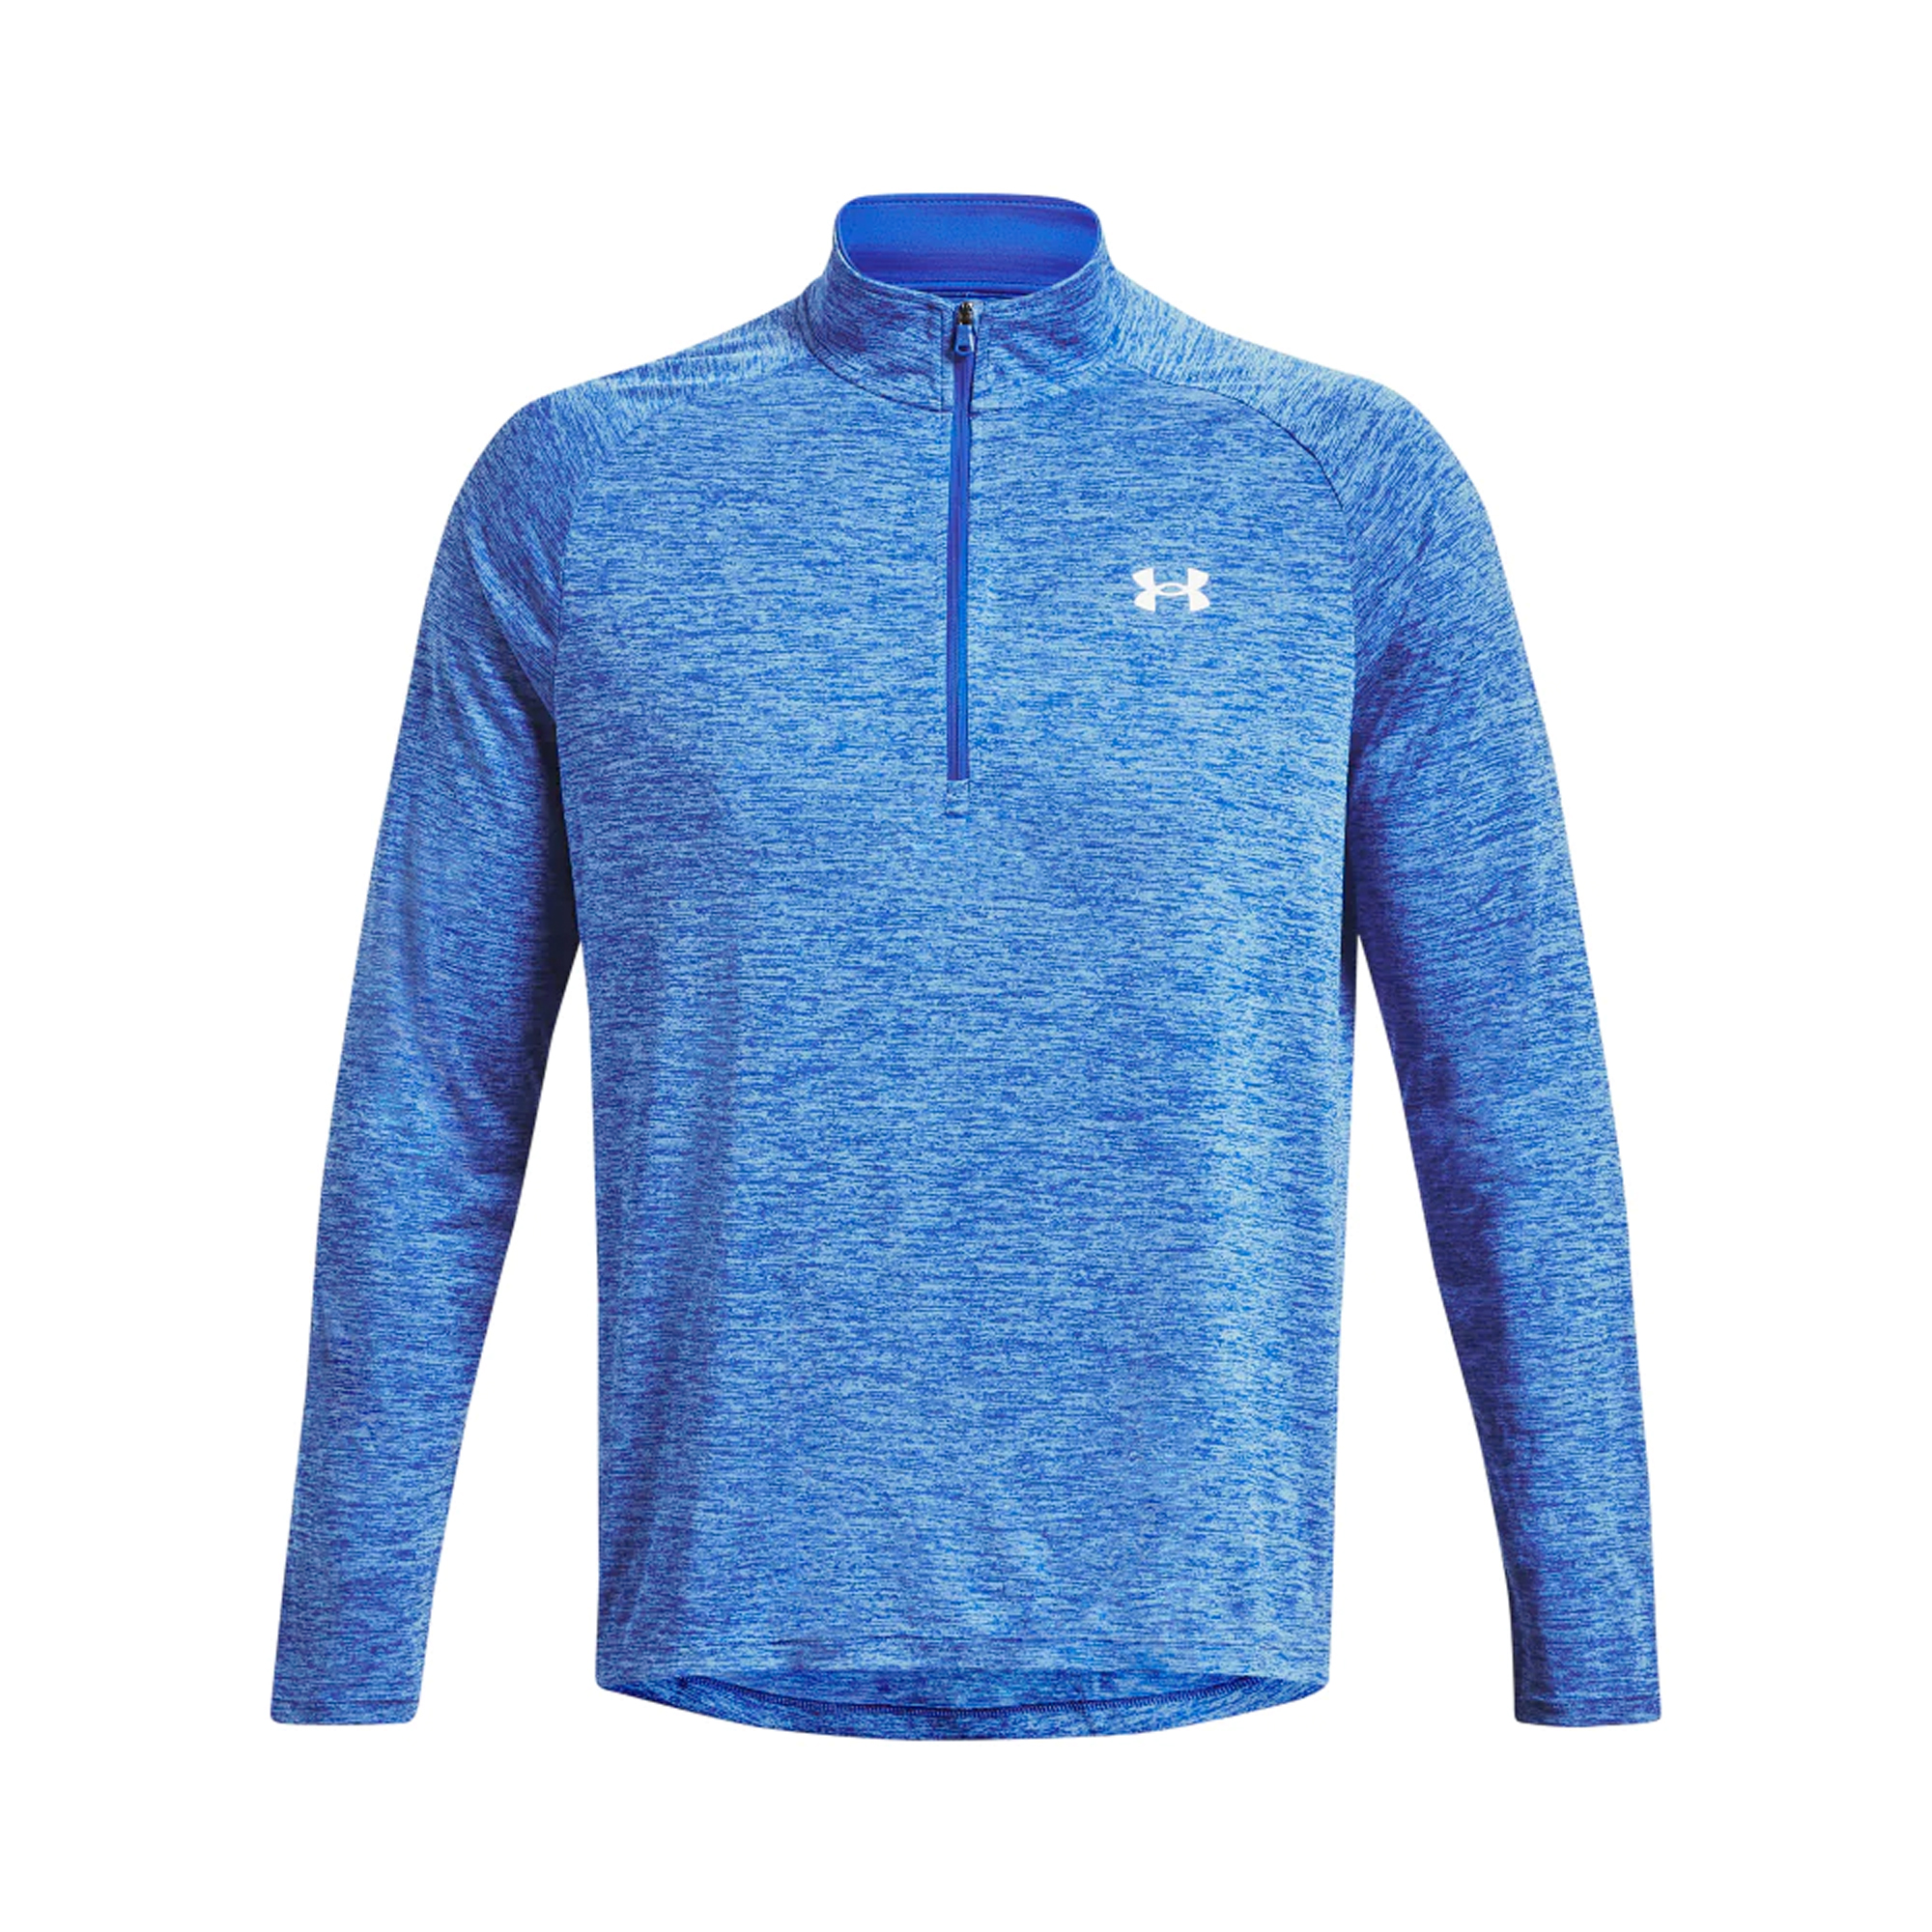 Mens Sports 2.0 1/2 | Under Armour Sweater Zip Scratch72 Breathable Tech Top UA